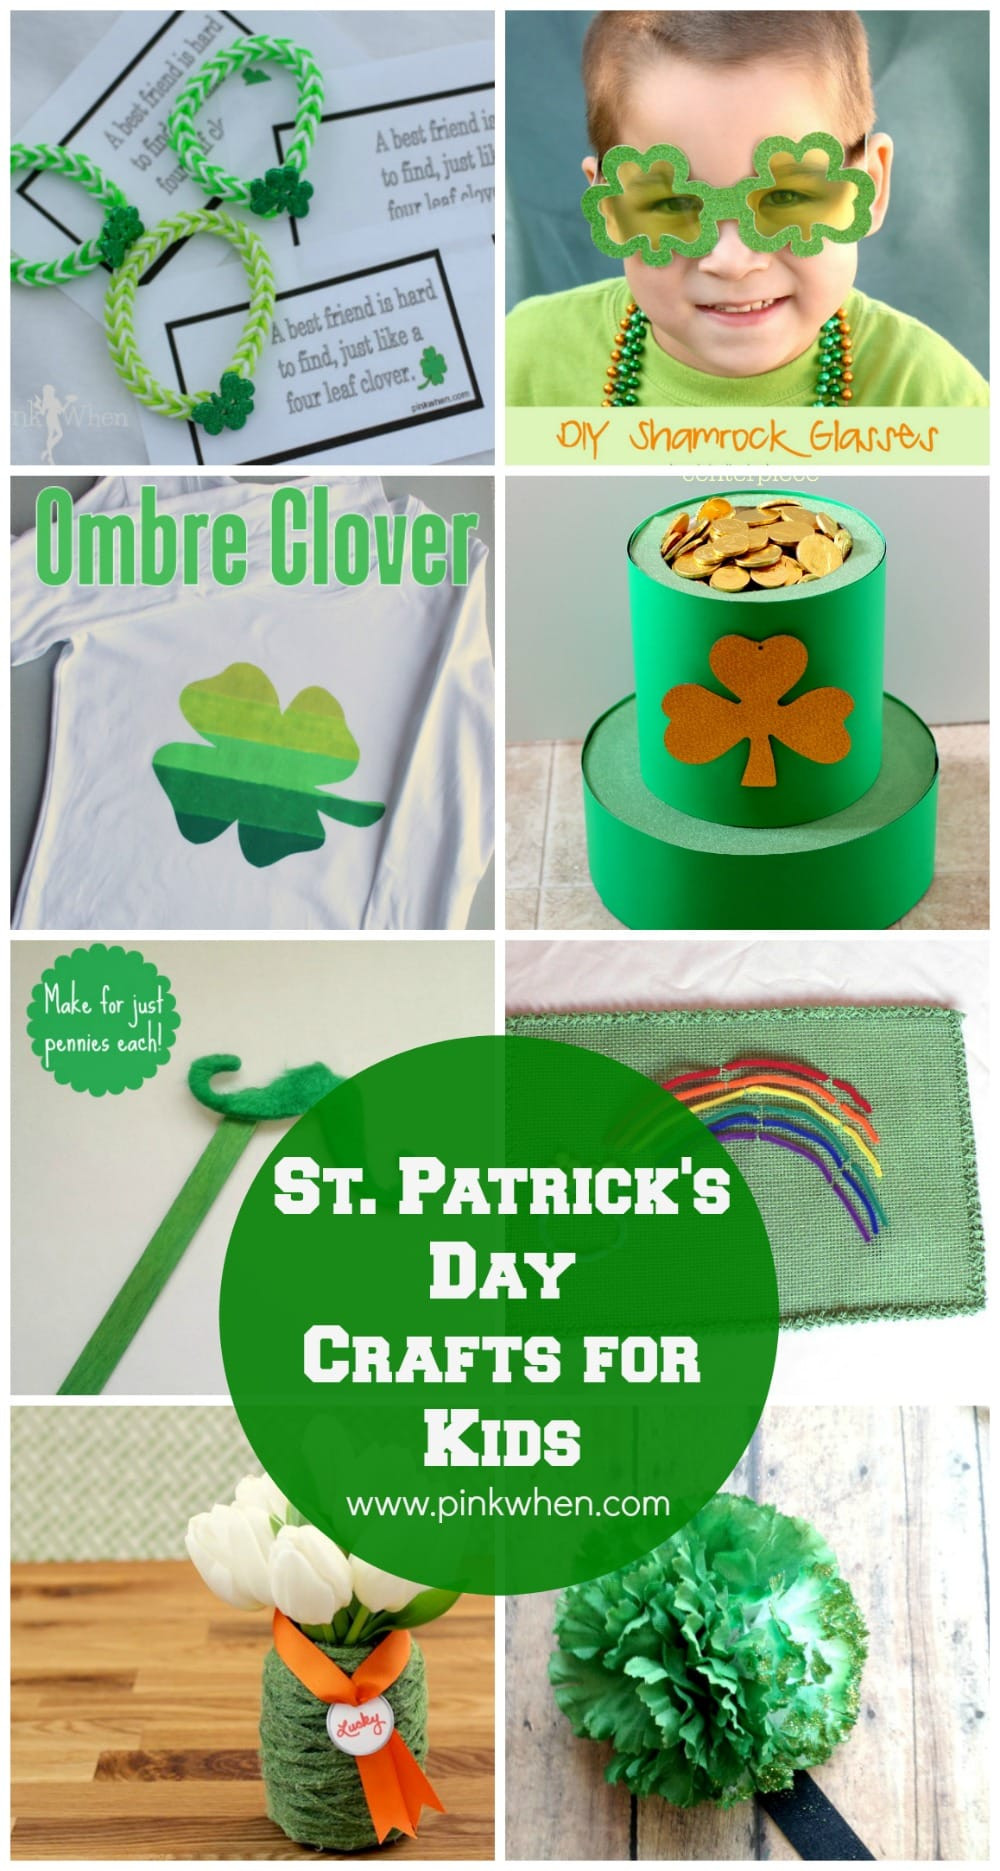 St Patrick's Day Crafts For Toddlers
 10 St Patrick s Day Crafts for Kids PinkWhen